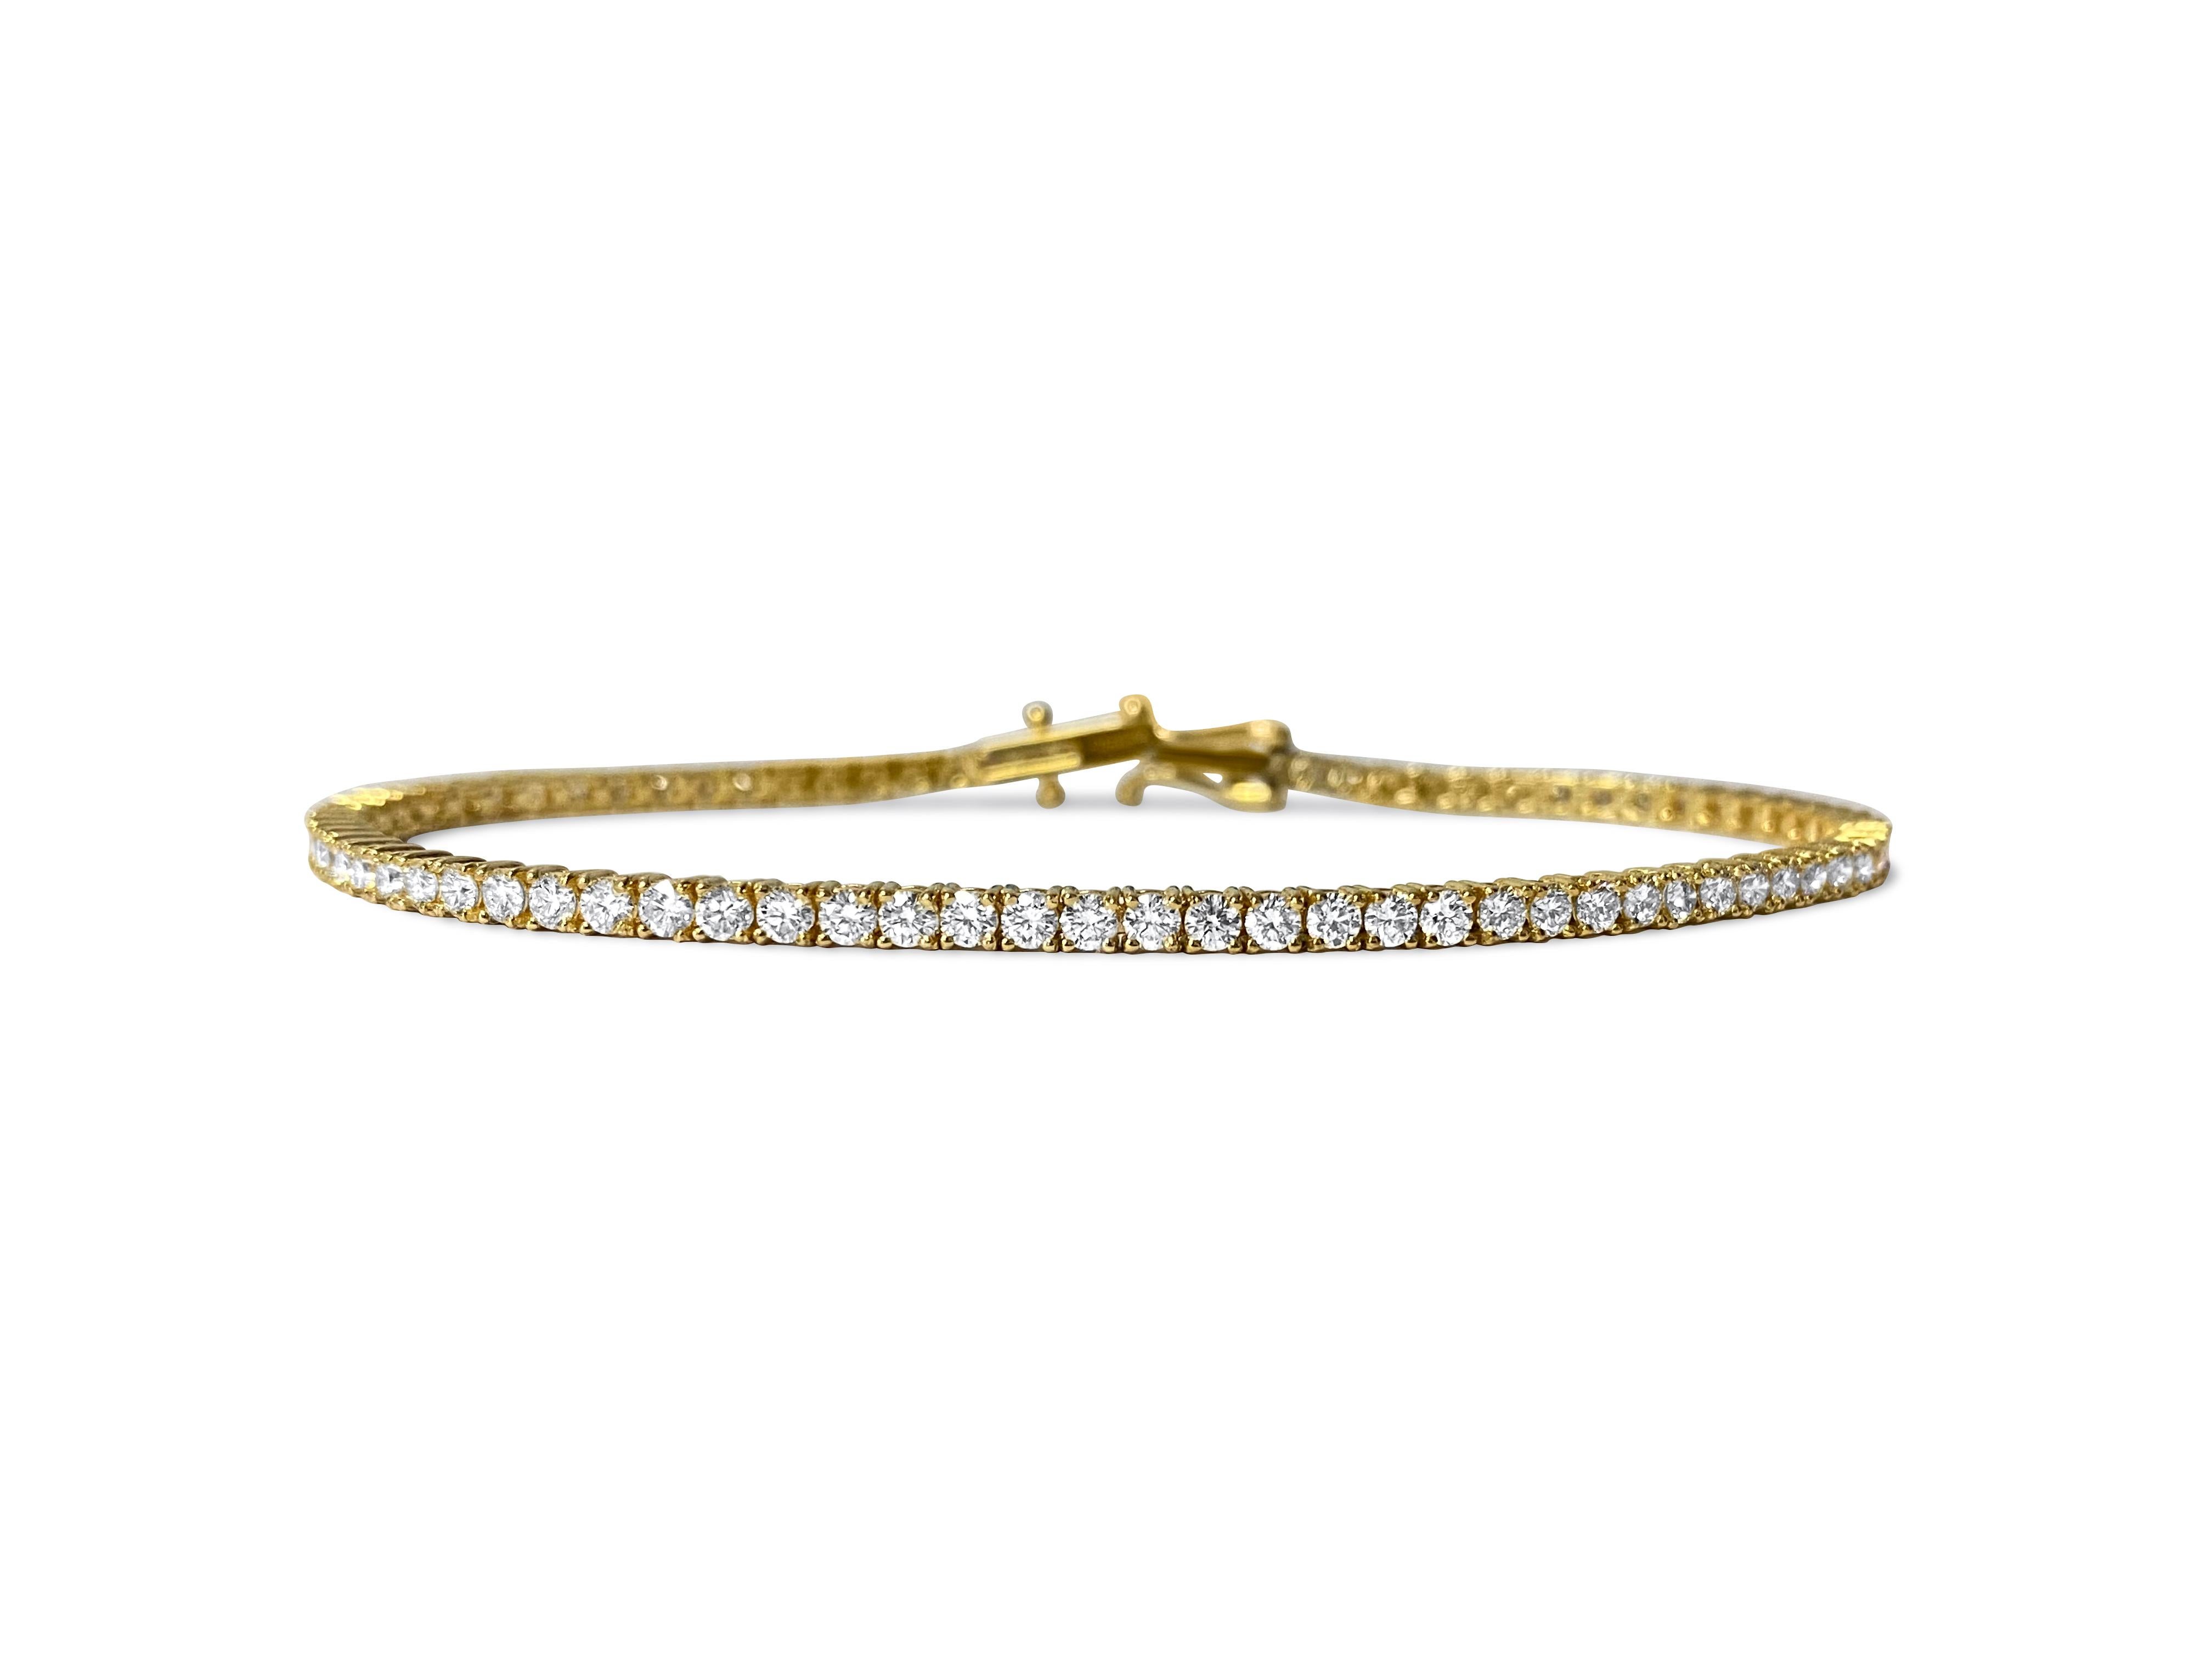 Presenting a spectacular diamond tennis bracelet crafted in 14k yellow gold, adorned with a total of 3.08 carats of exquisite diamonds. With VVS-VS clarity and H color, these round brilliant cut diamonds sparkle brilliantly, set securely in prongs